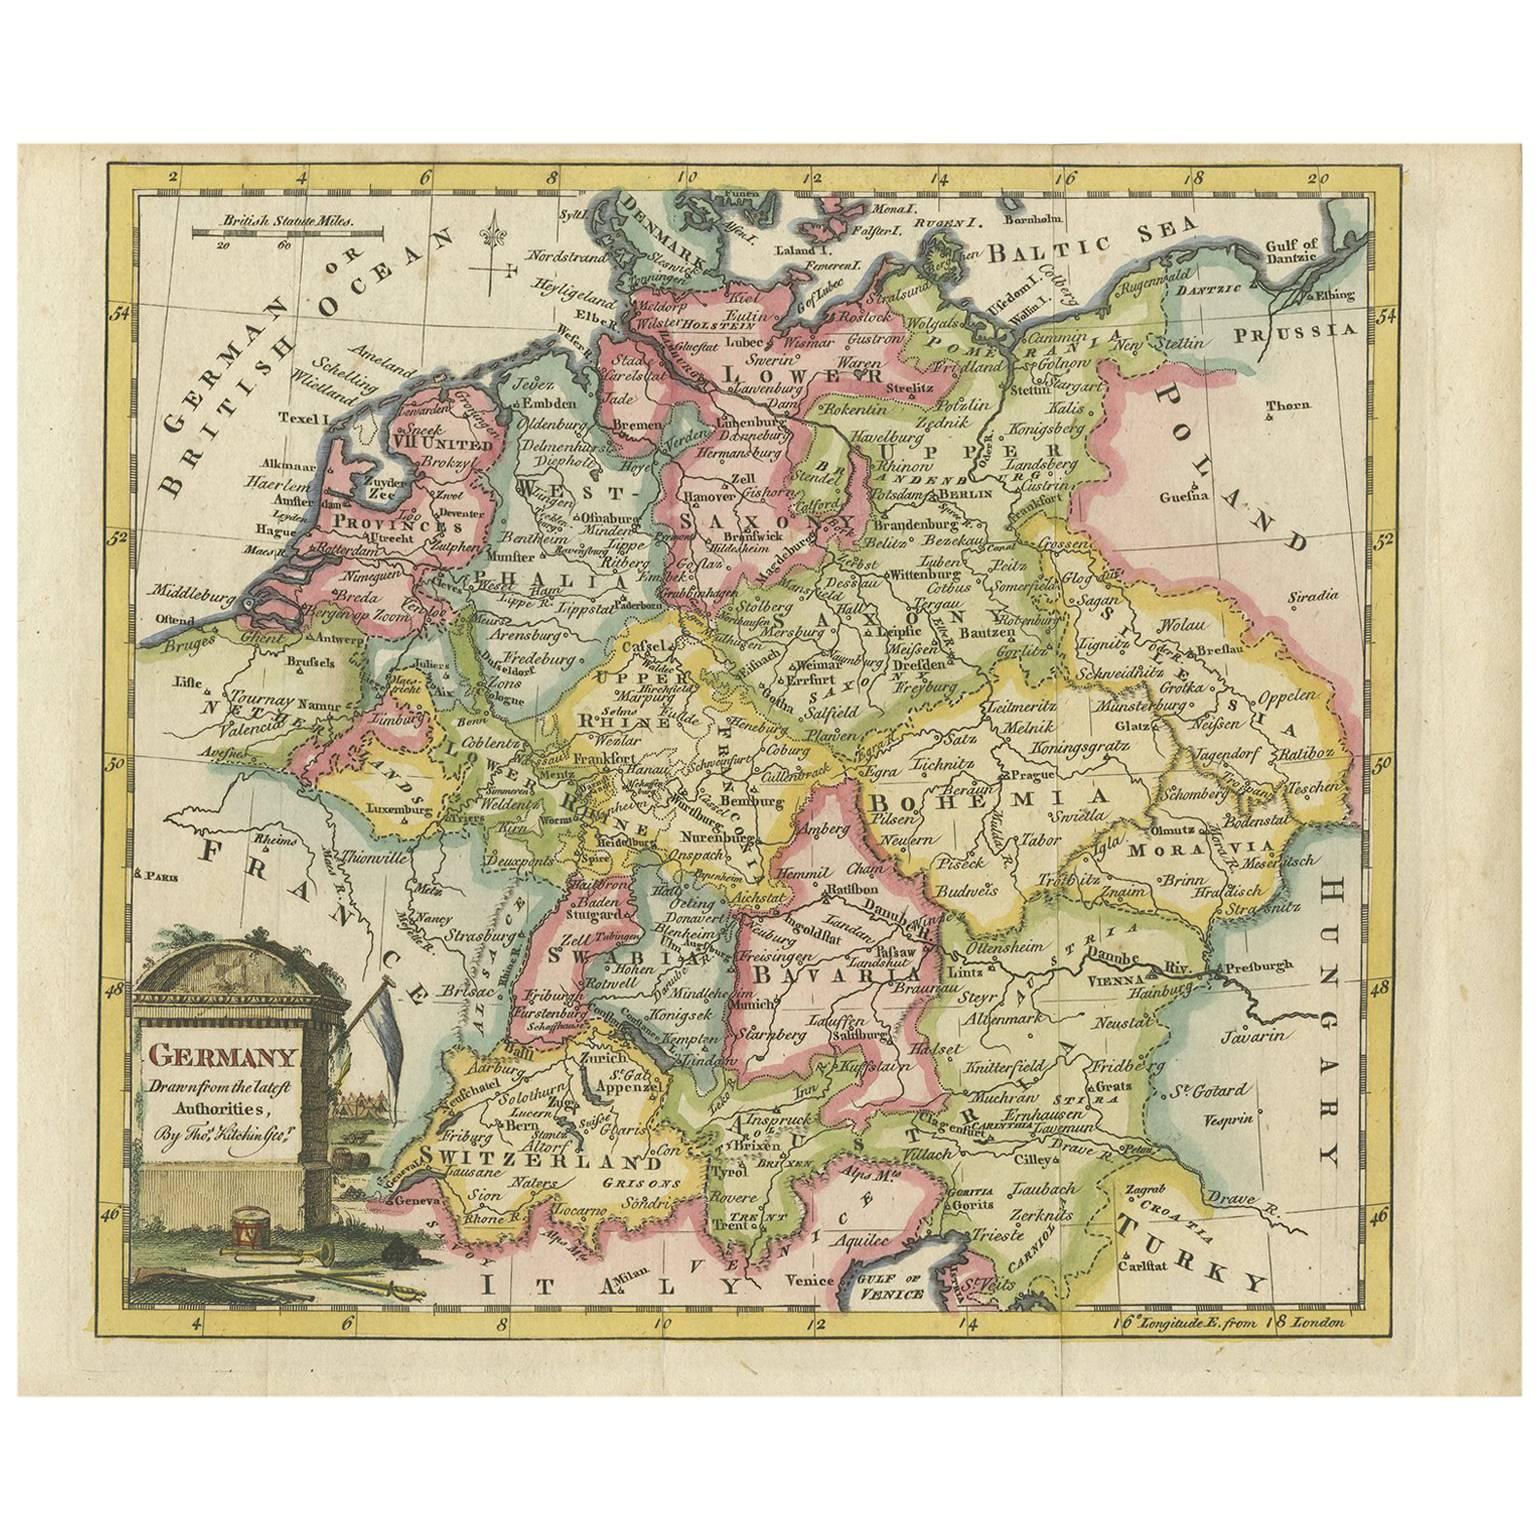 Antique Map of Germany by T. Kitchin, circa 1780